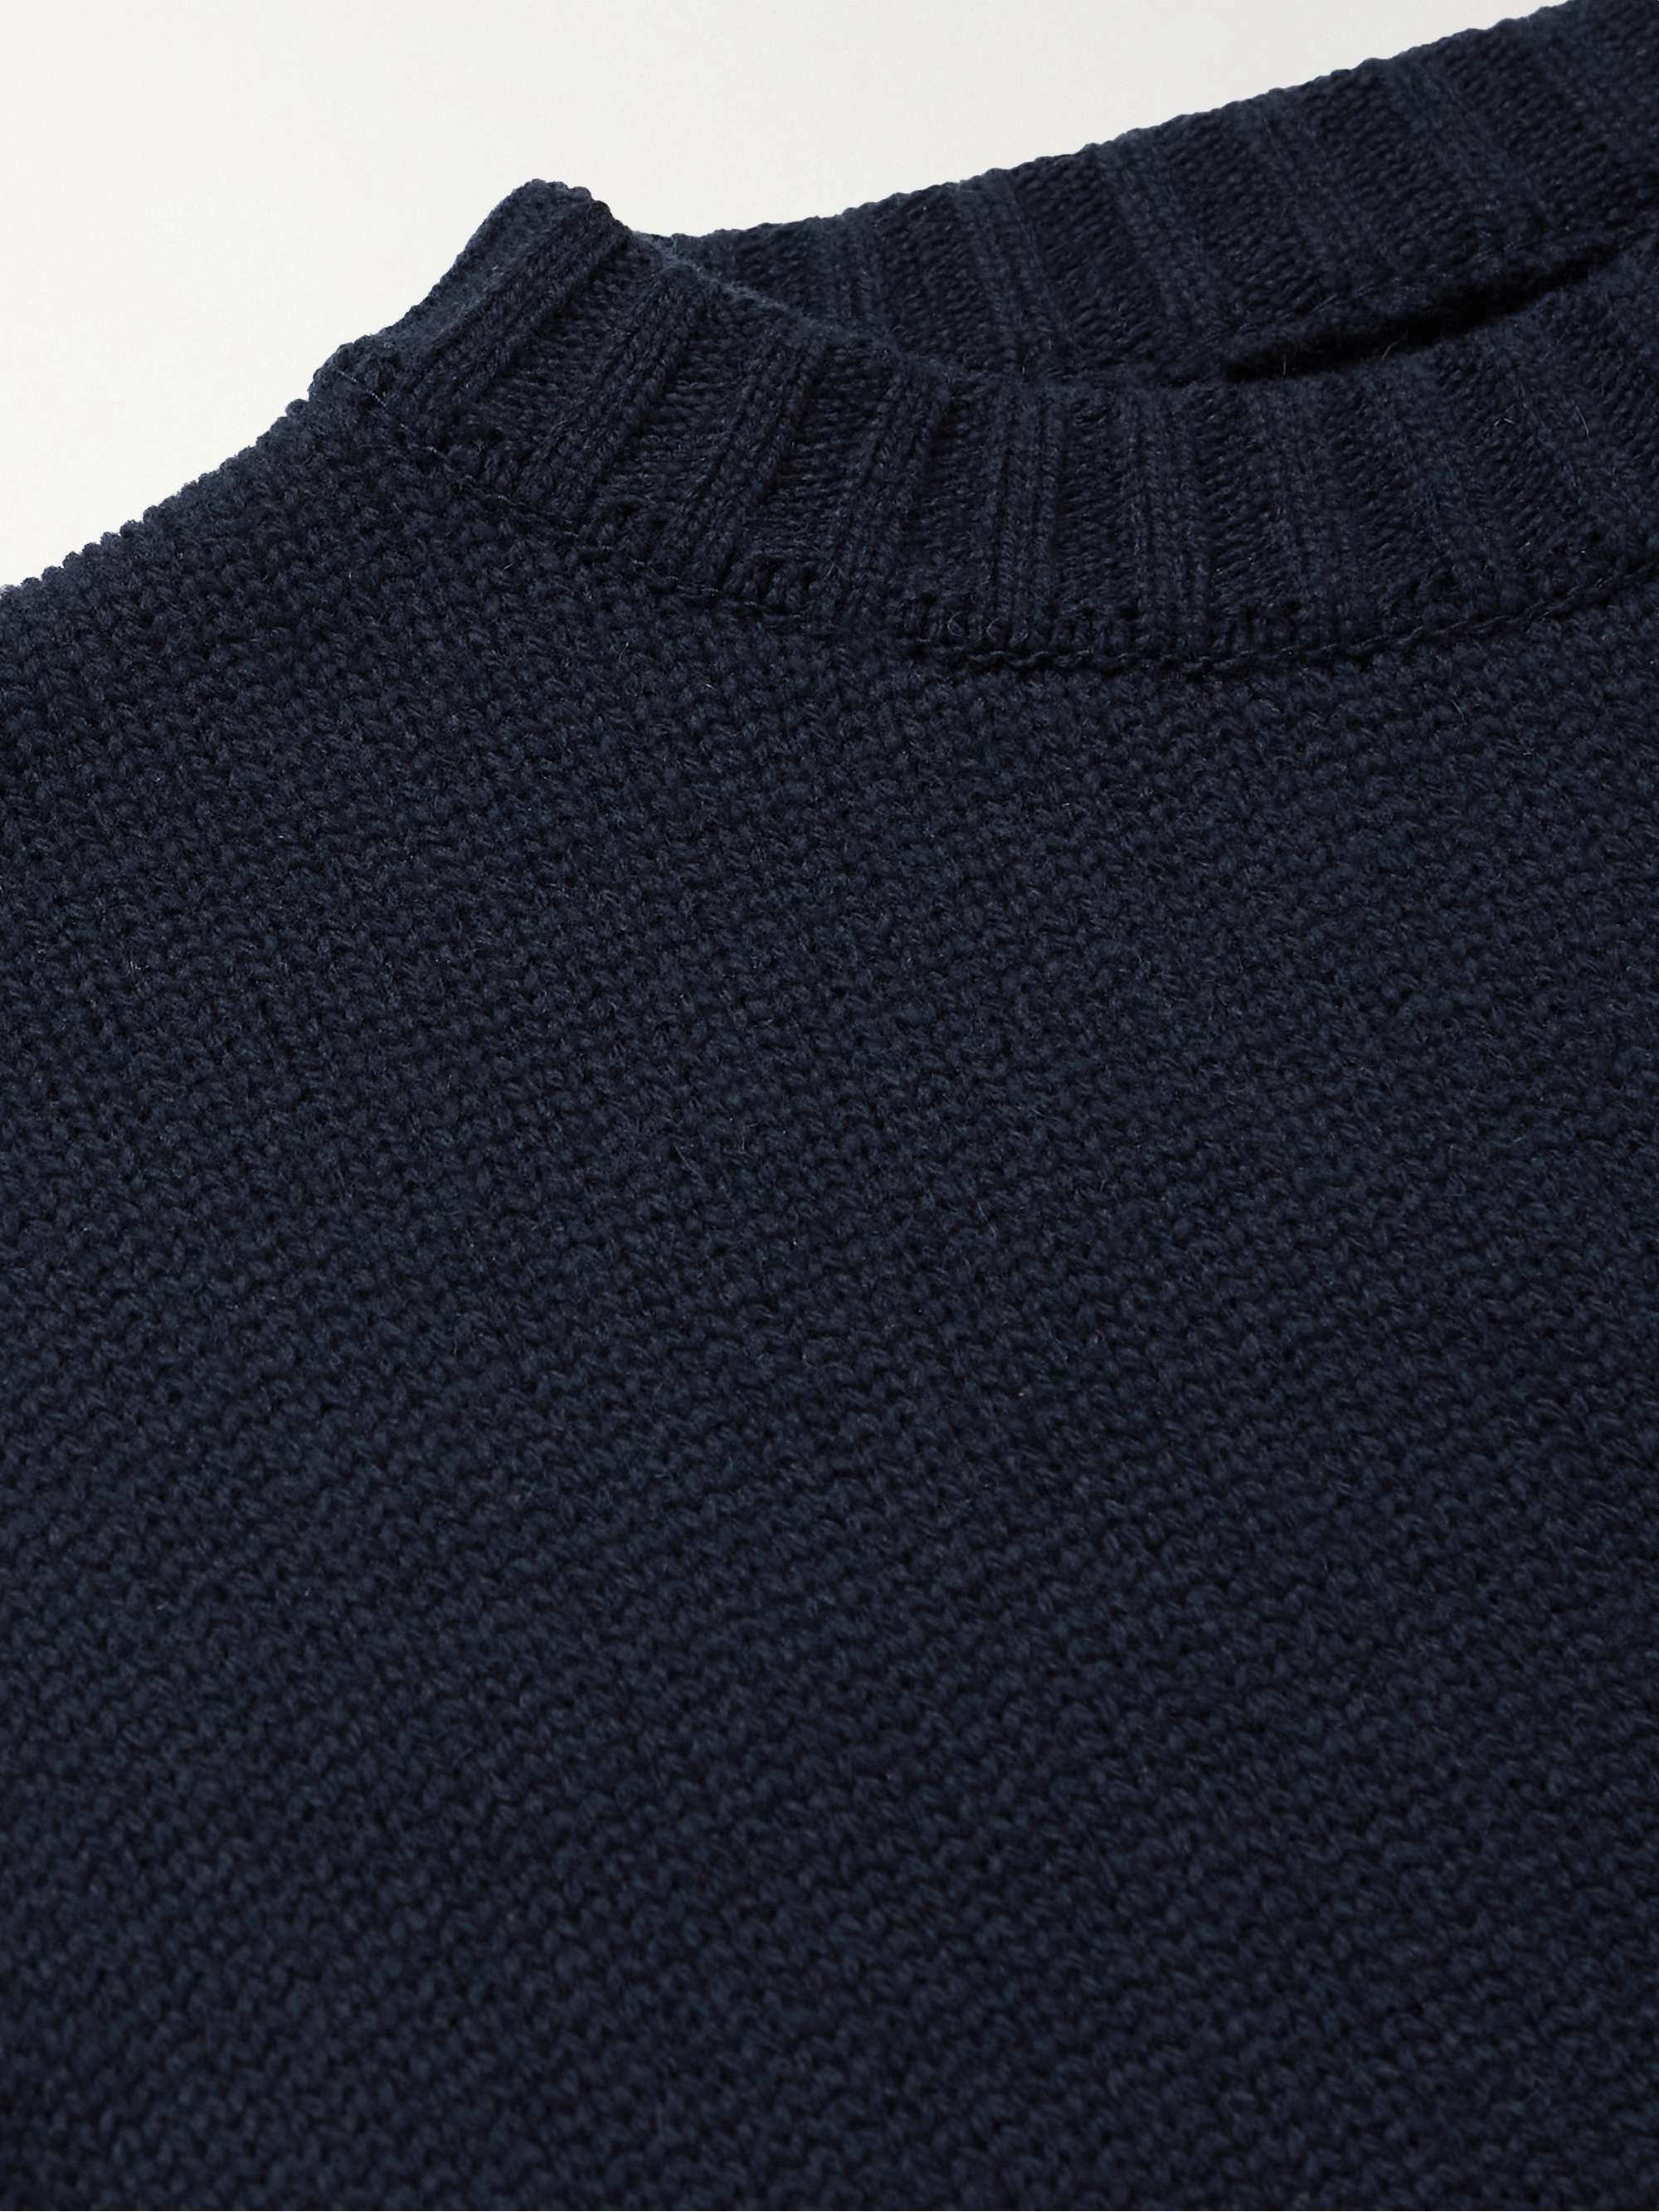 ANONYMOUS ISM Slim-Fit Striped Wool Sweater